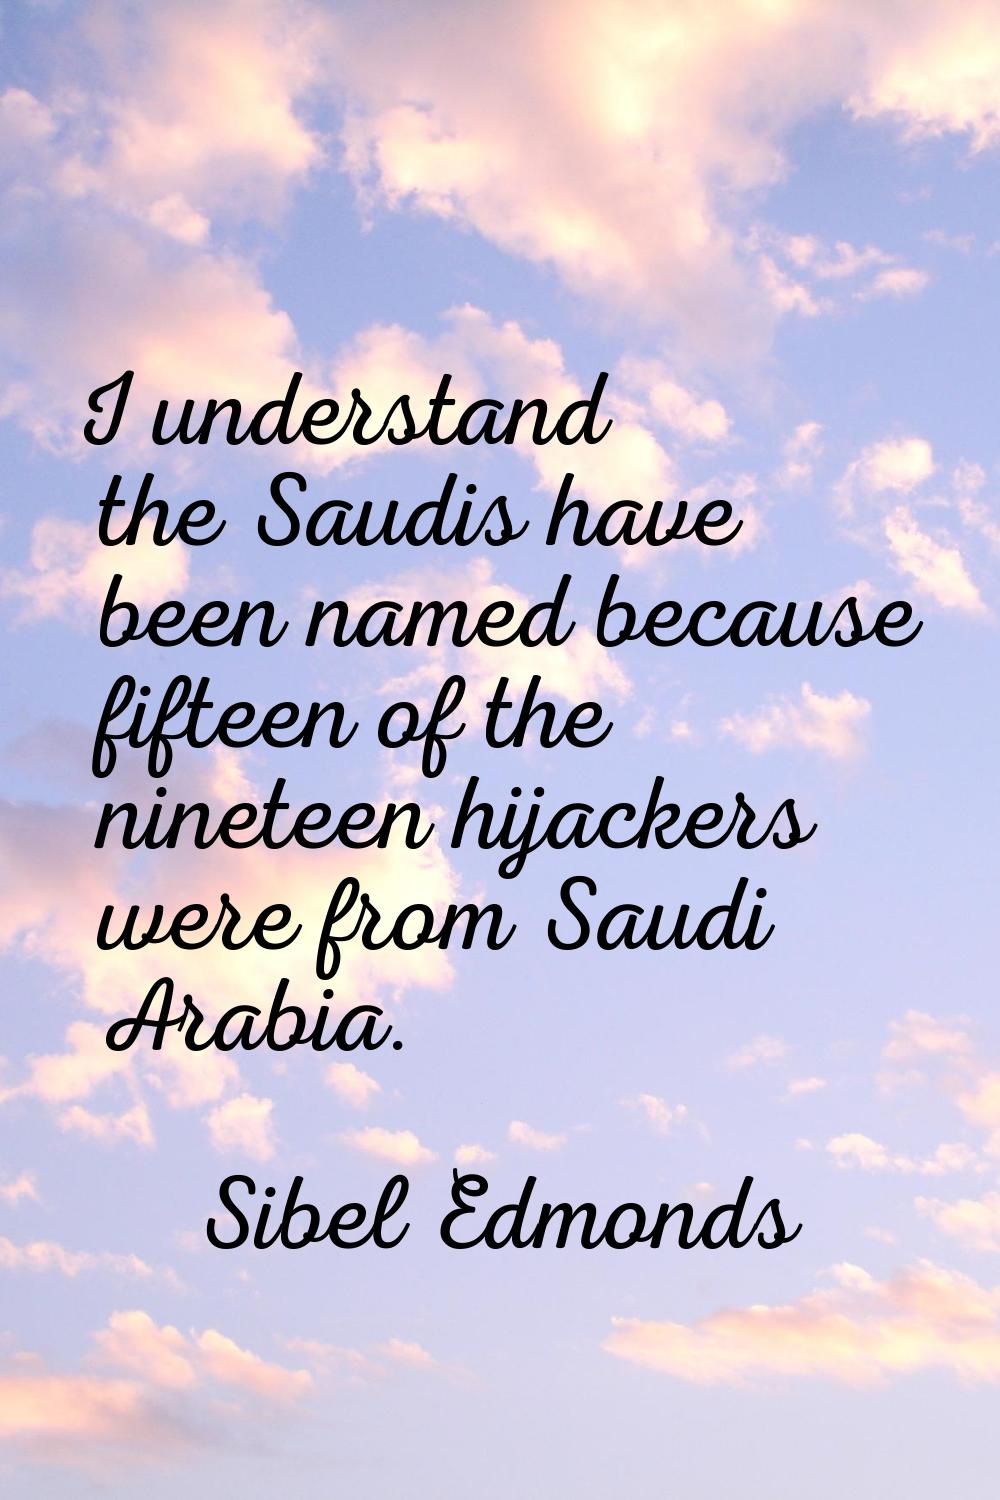 I understand the Saudis have been named because fifteen of the nineteen hijackers were from Saudi A